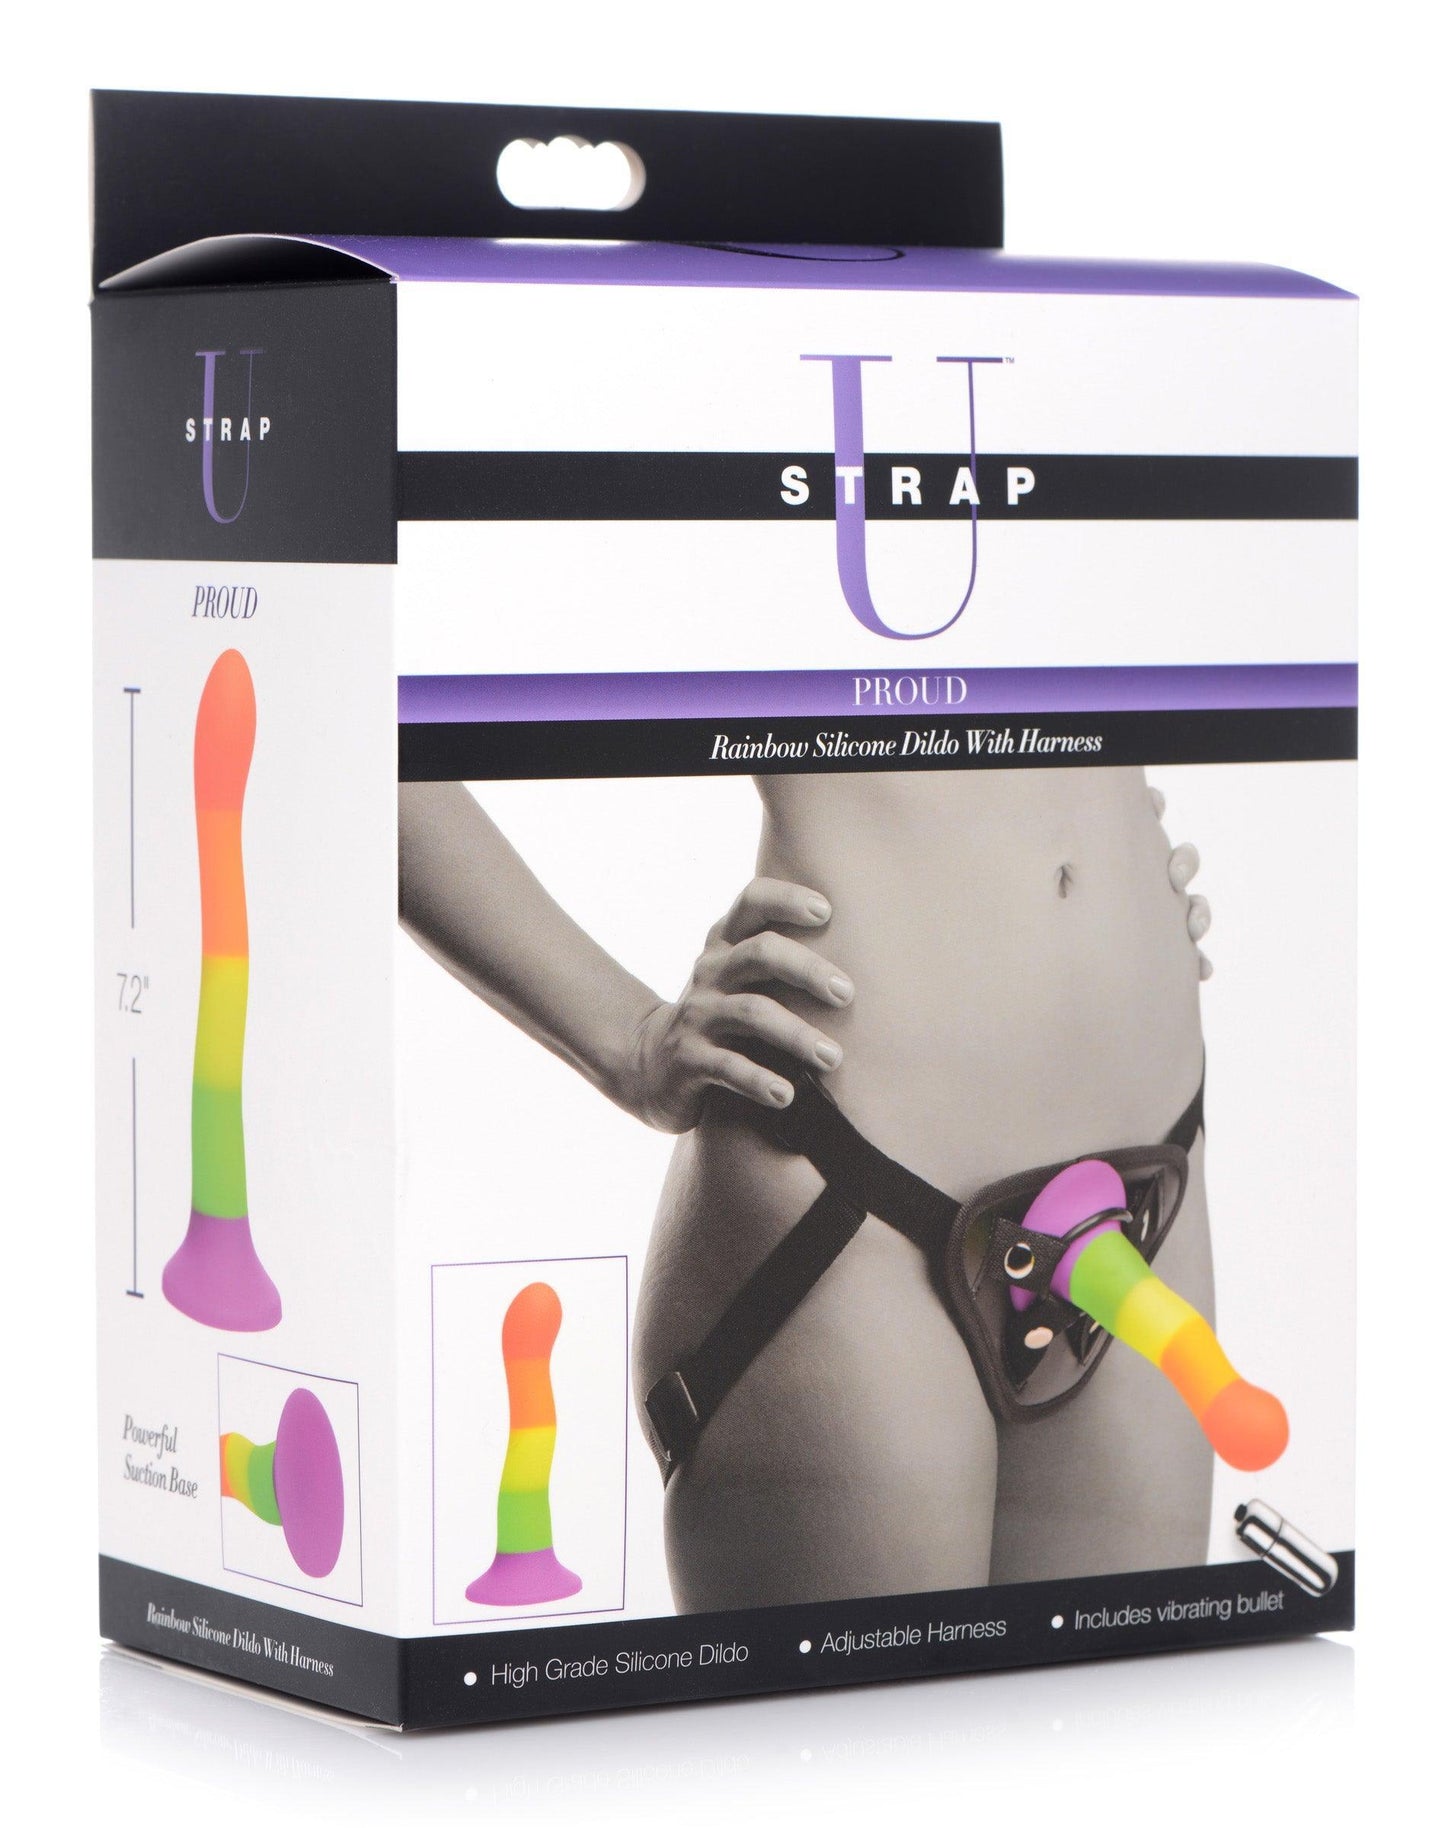 Proud Rainbow Silicone Dildo With Harness - My Sex Toy Hub